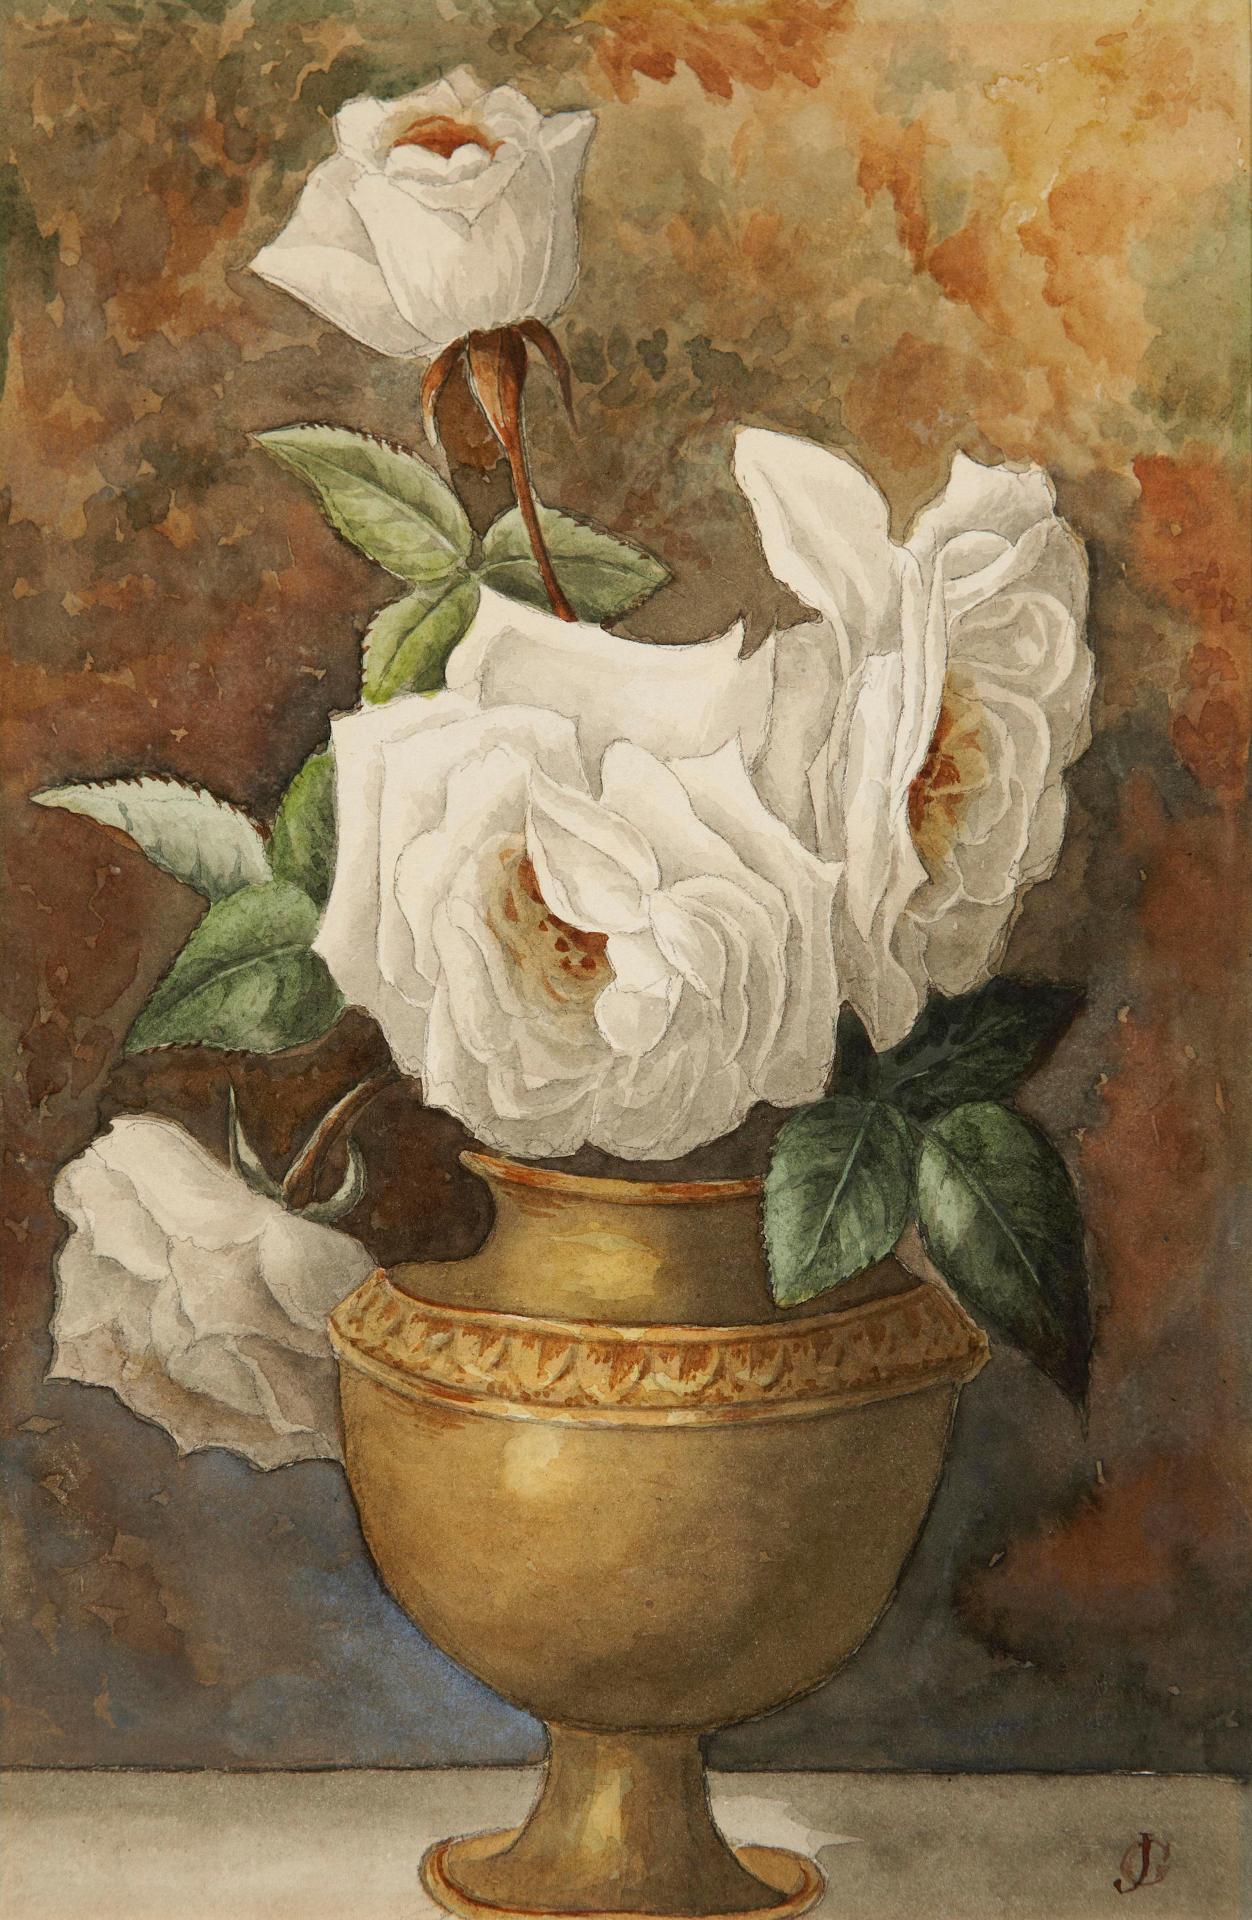 James Griffiths (1825-1896) - White Roses